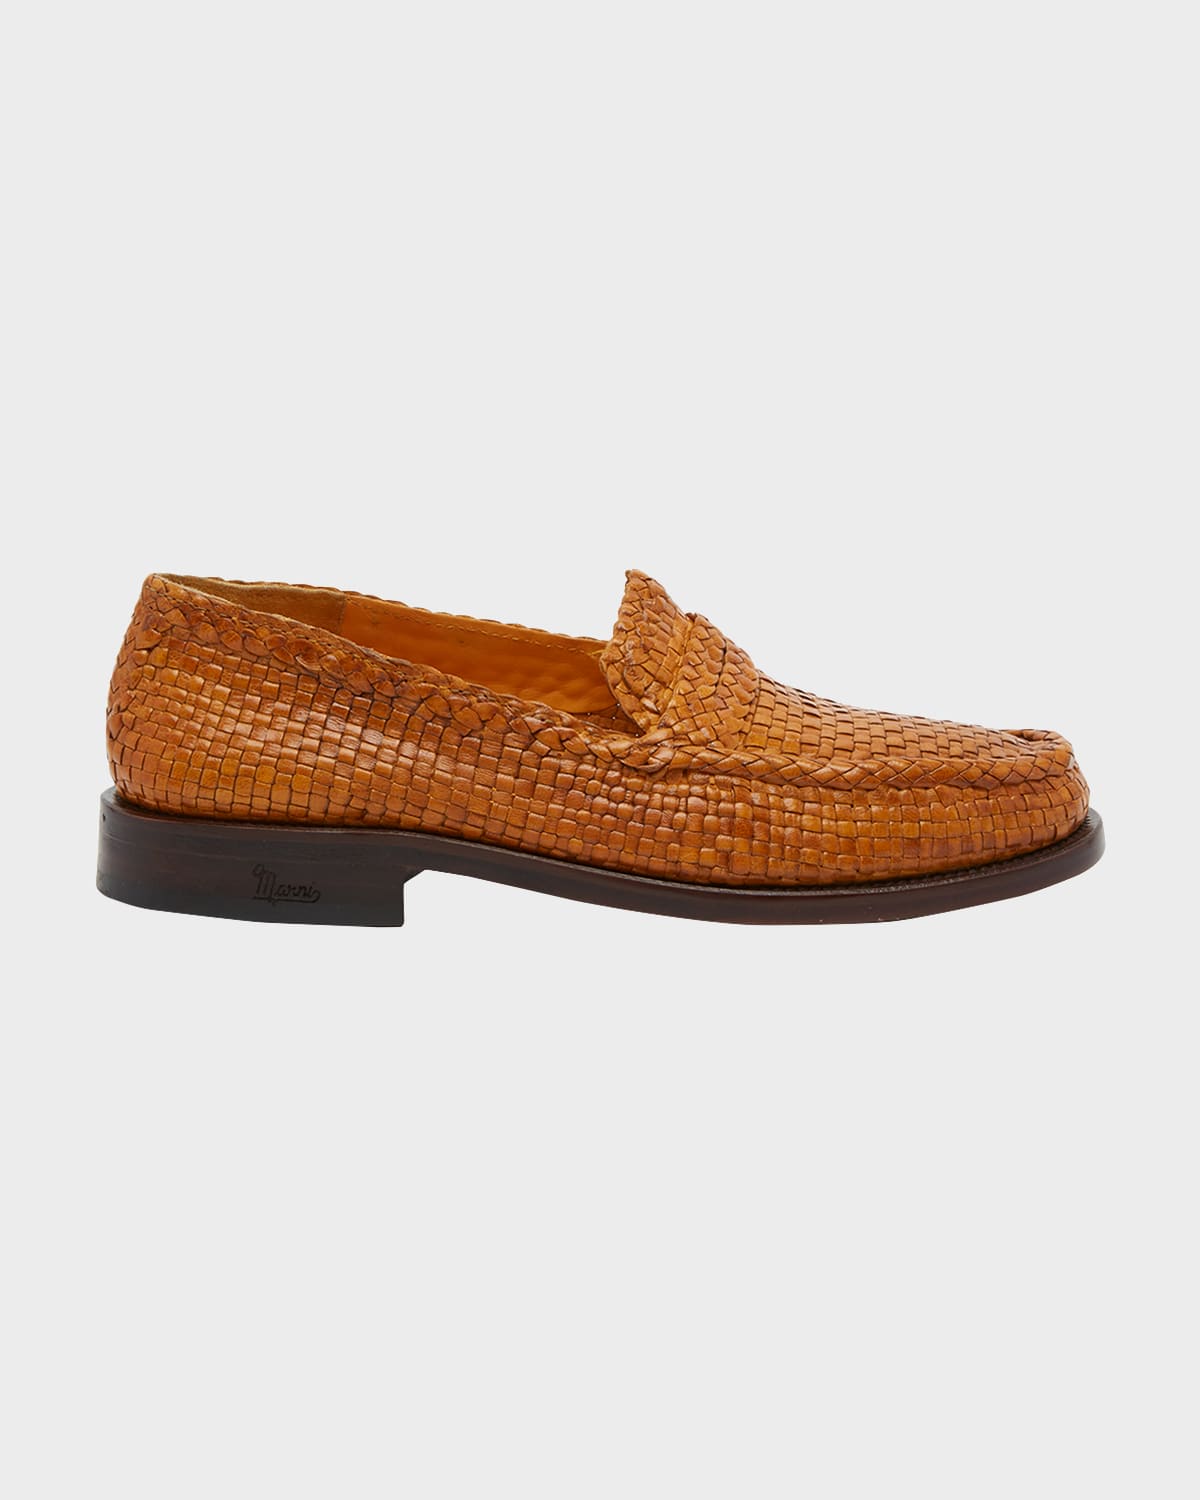 Woven Leather Penny Loafers